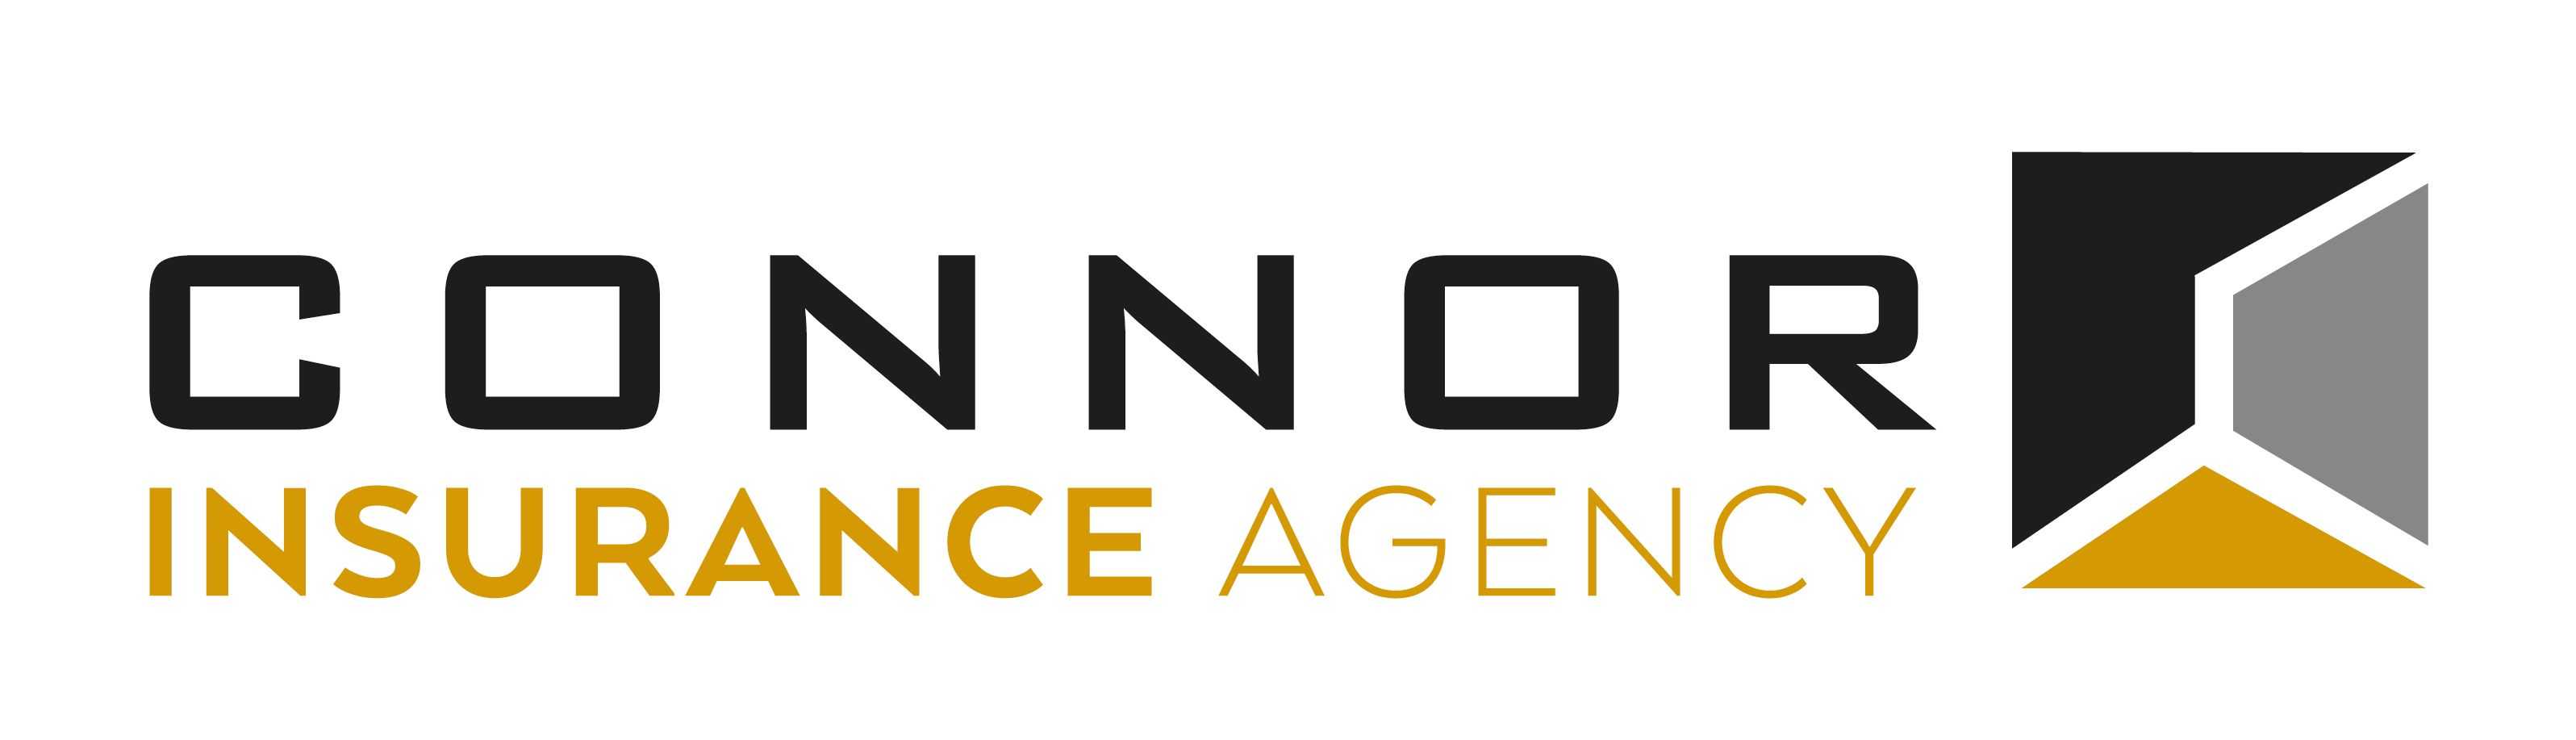 Connor Insurance Agency, Incorporated logo